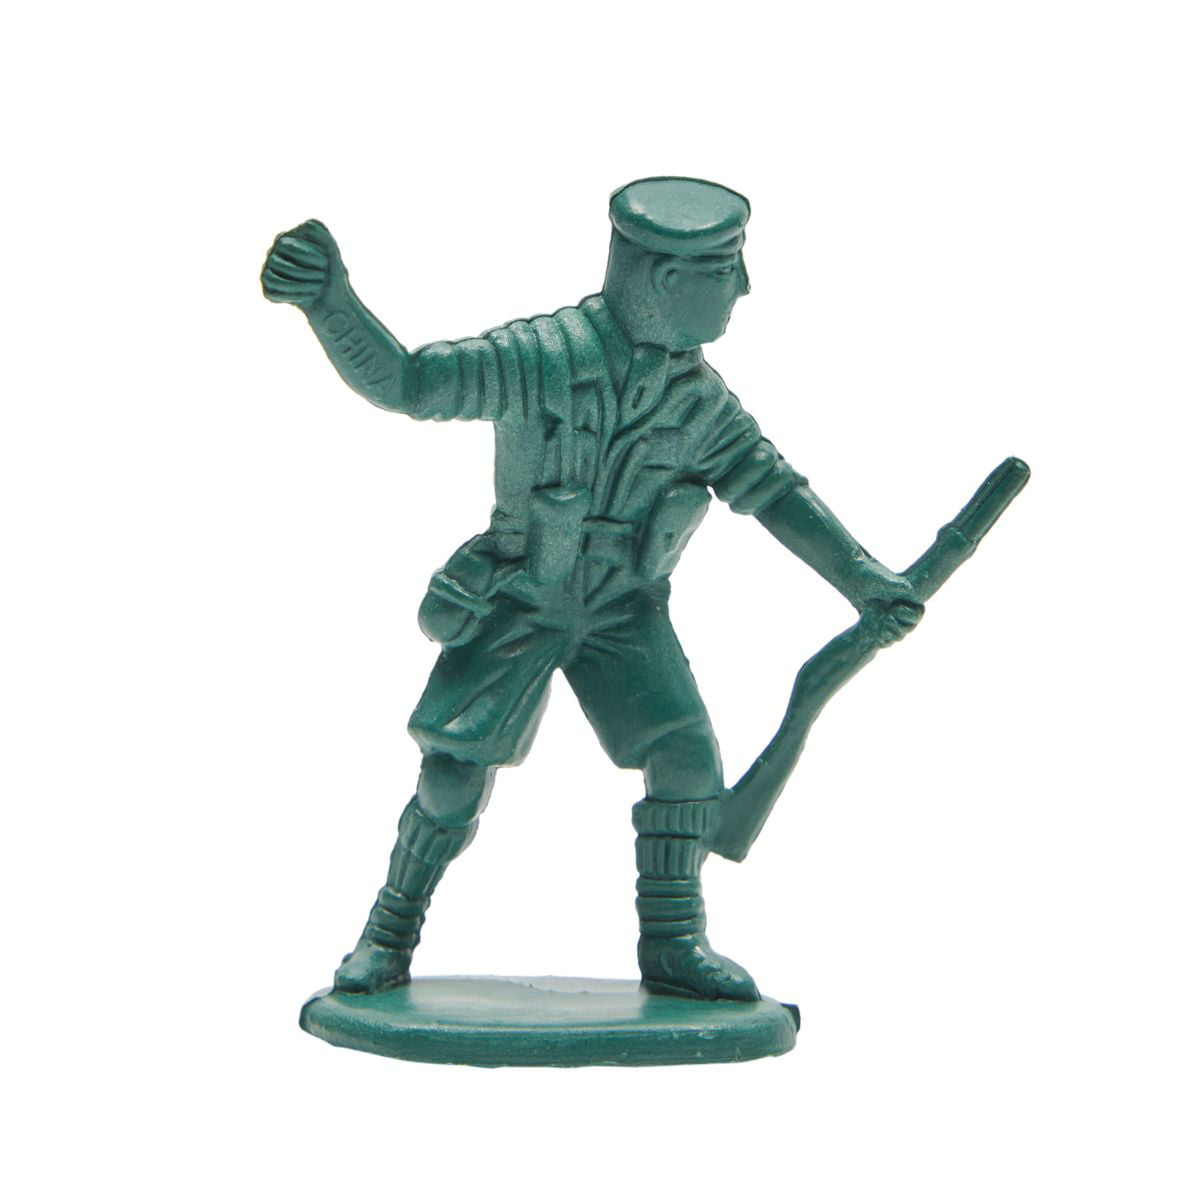 200-Piece Military Figures Set Toy Soldiers Army in 4 Colors World War II 